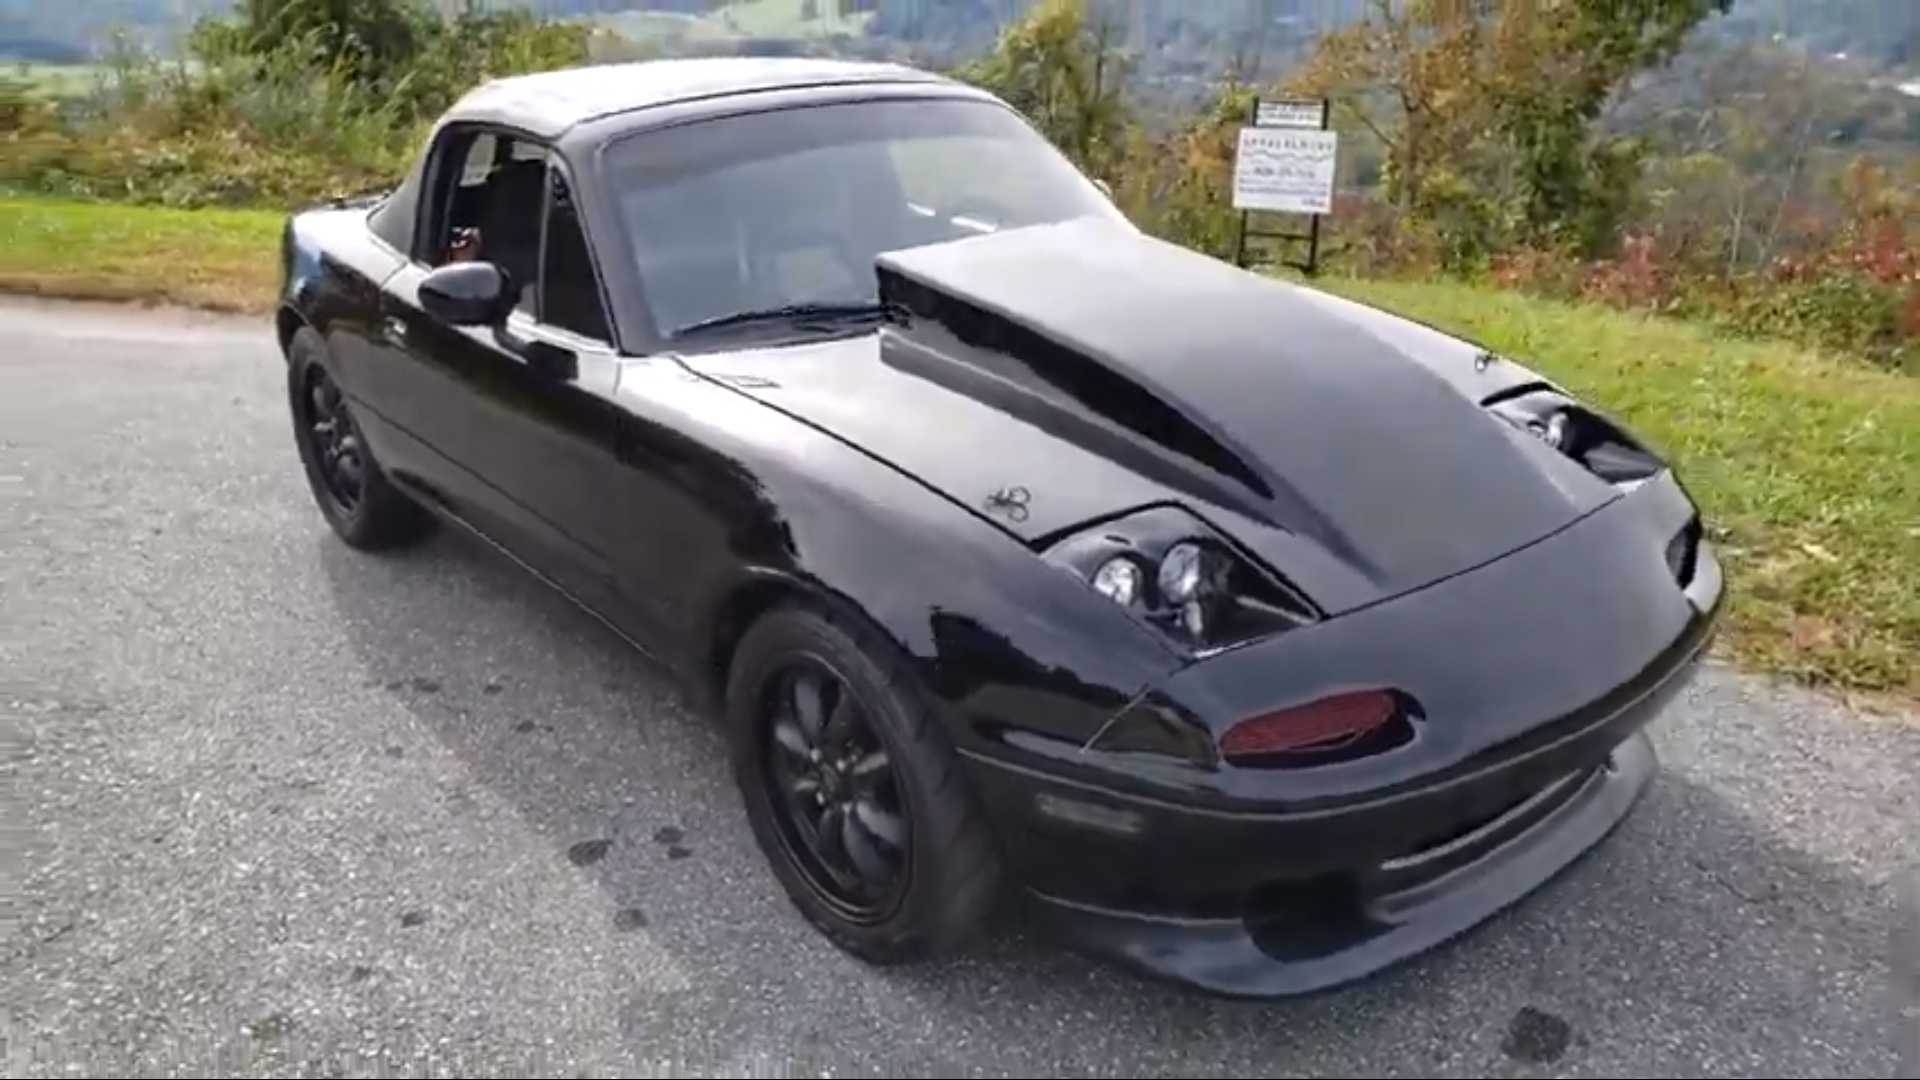 Monster Mazda Logo - Buy This Monster Miata With A Stroked V8, Go Hellcat Hunting